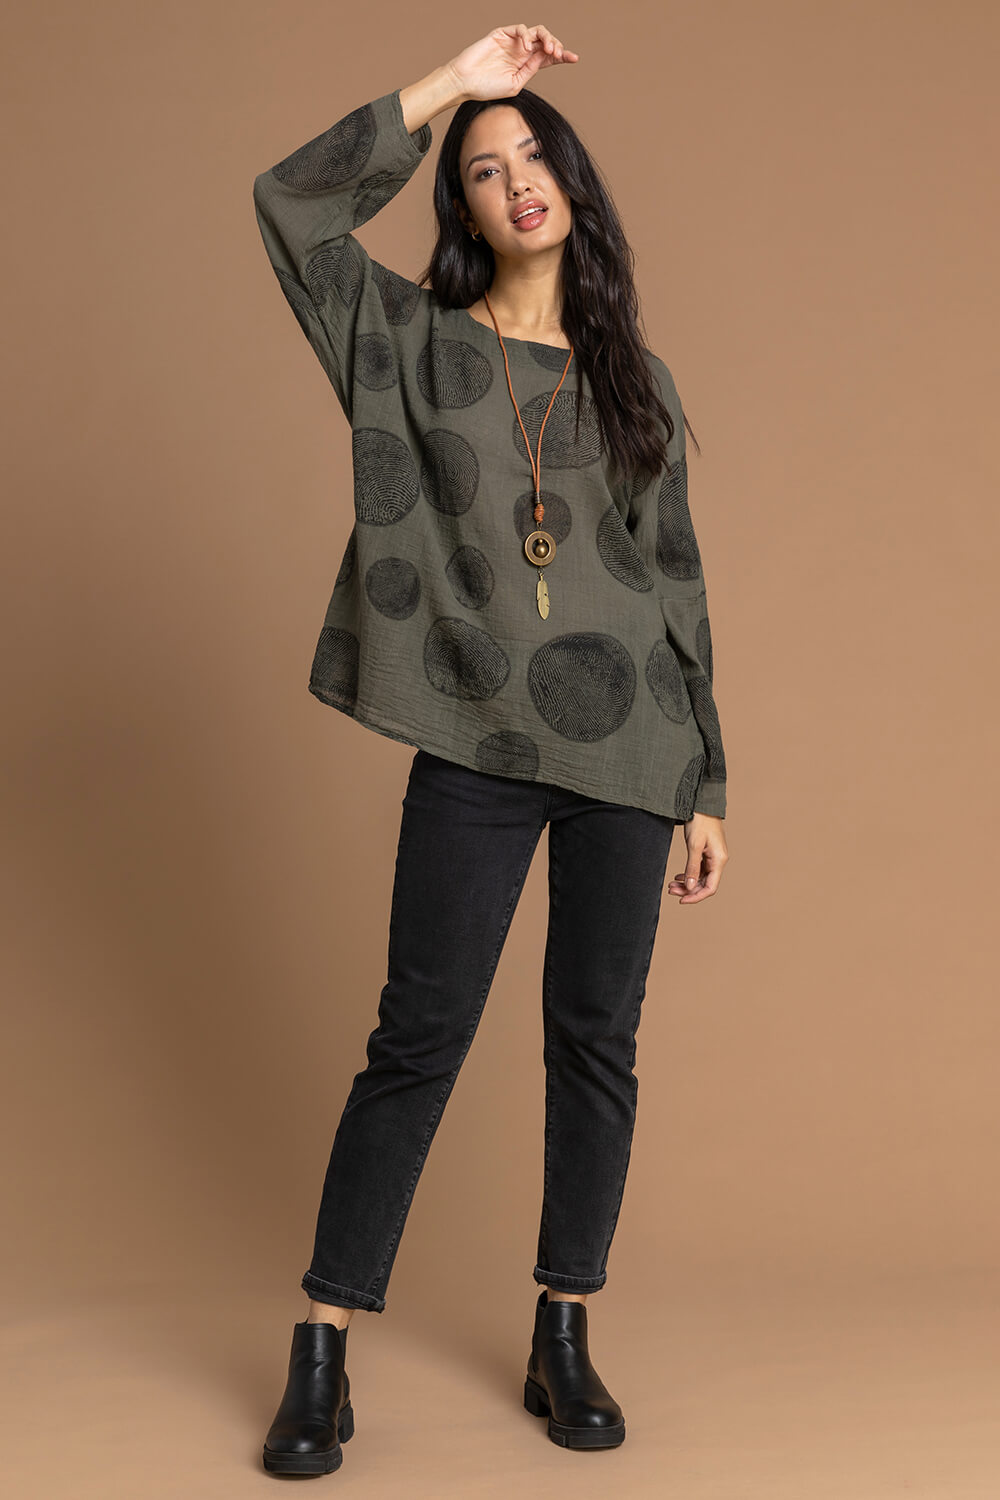 KHAKI Spot Print Top With Necklace, Image 3 of 4